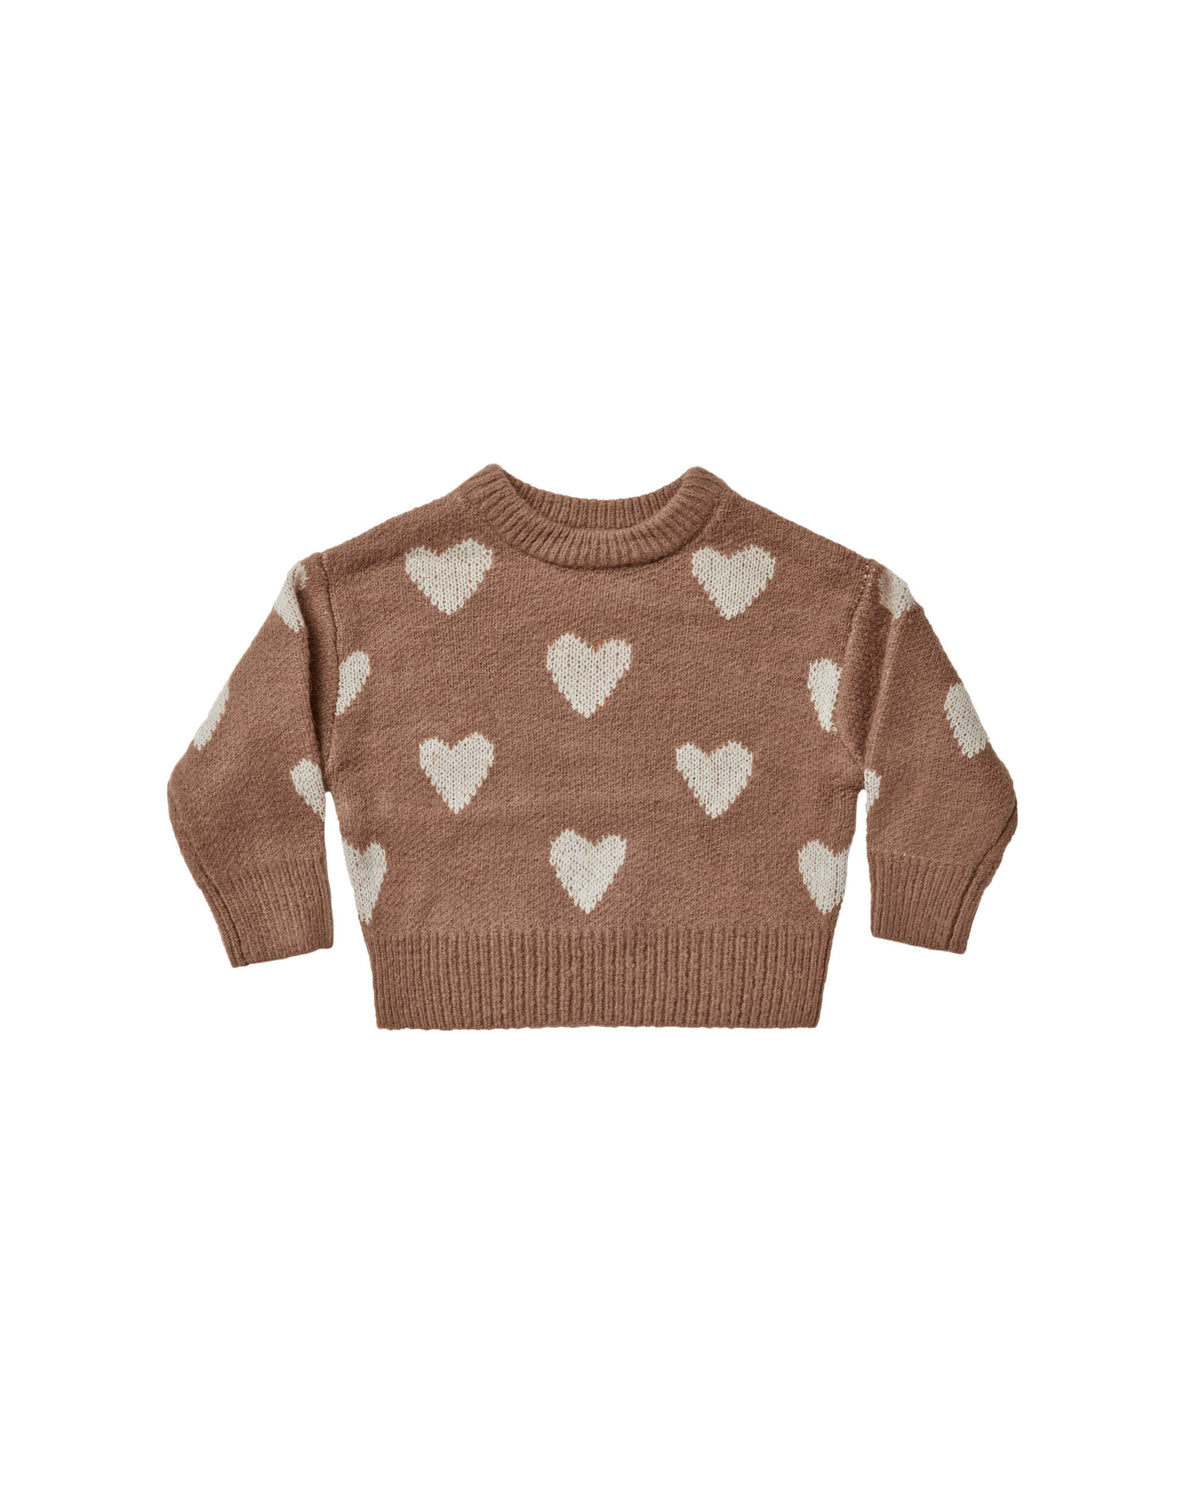 Rylee & Cru knit pullover || hearts